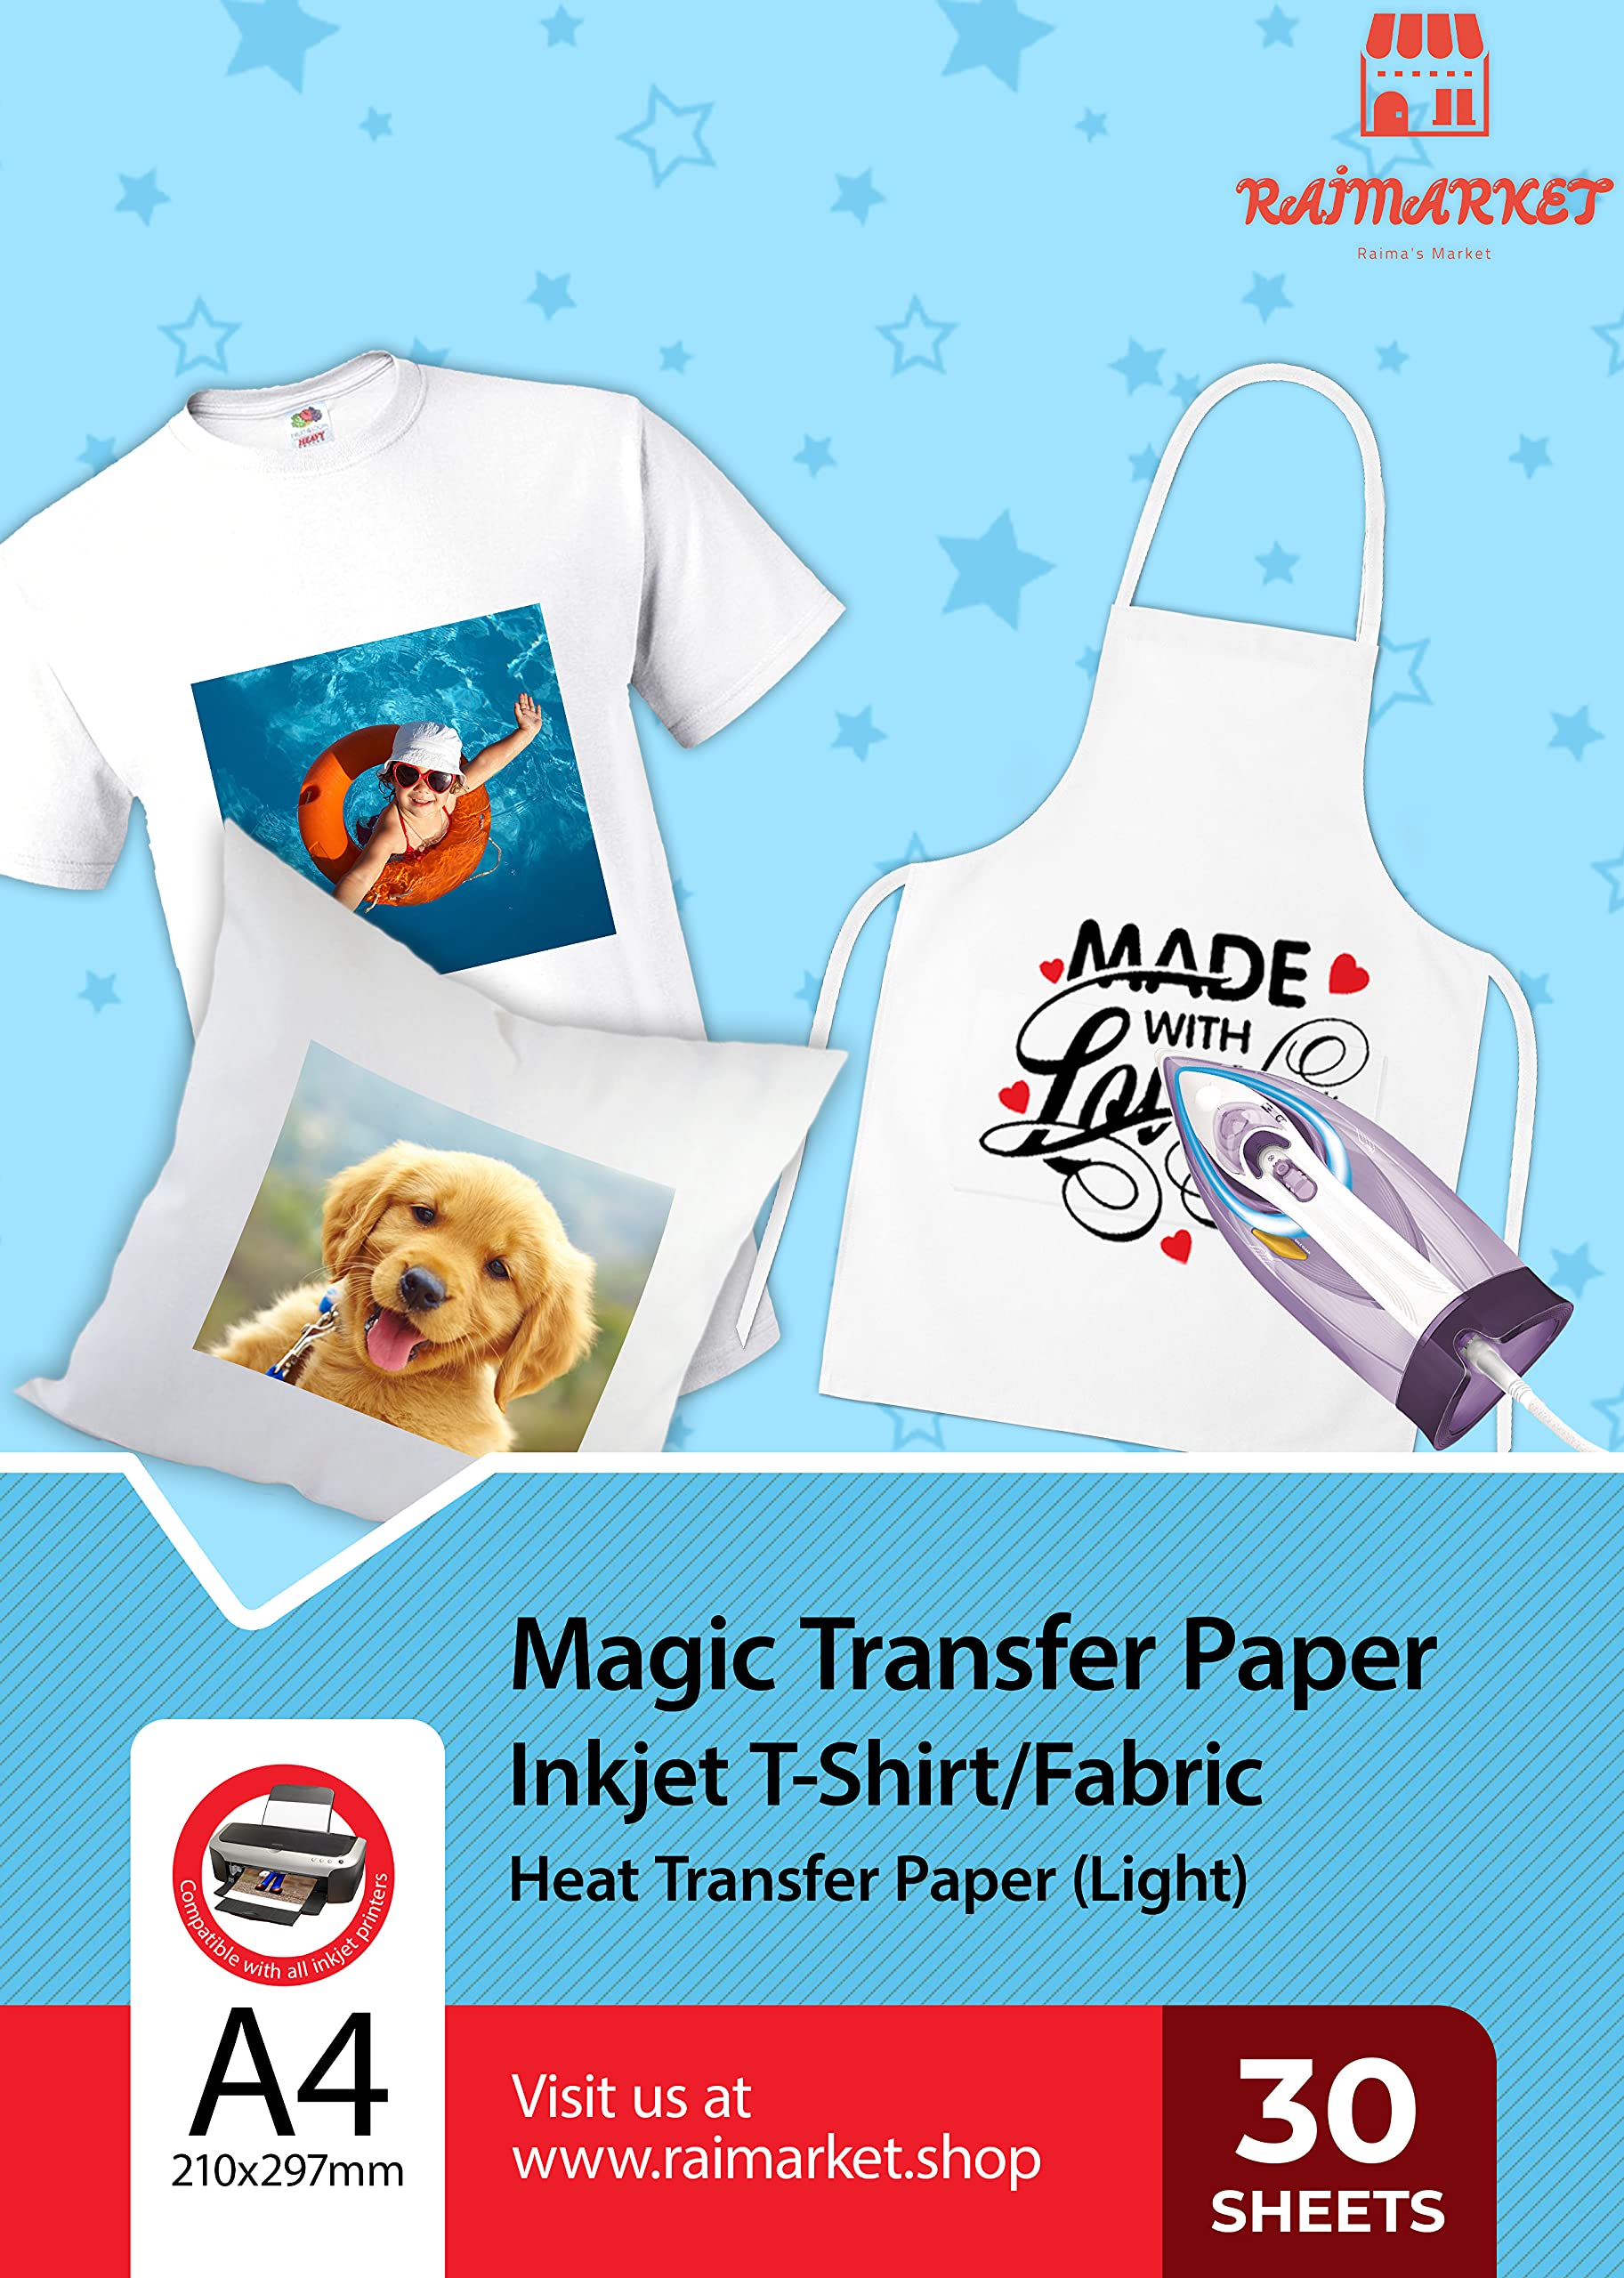 Heat Transfer Paper for T Shirts by Raimarket, Printable Iron on Transfers  for T Shirts and White/Light fabrics